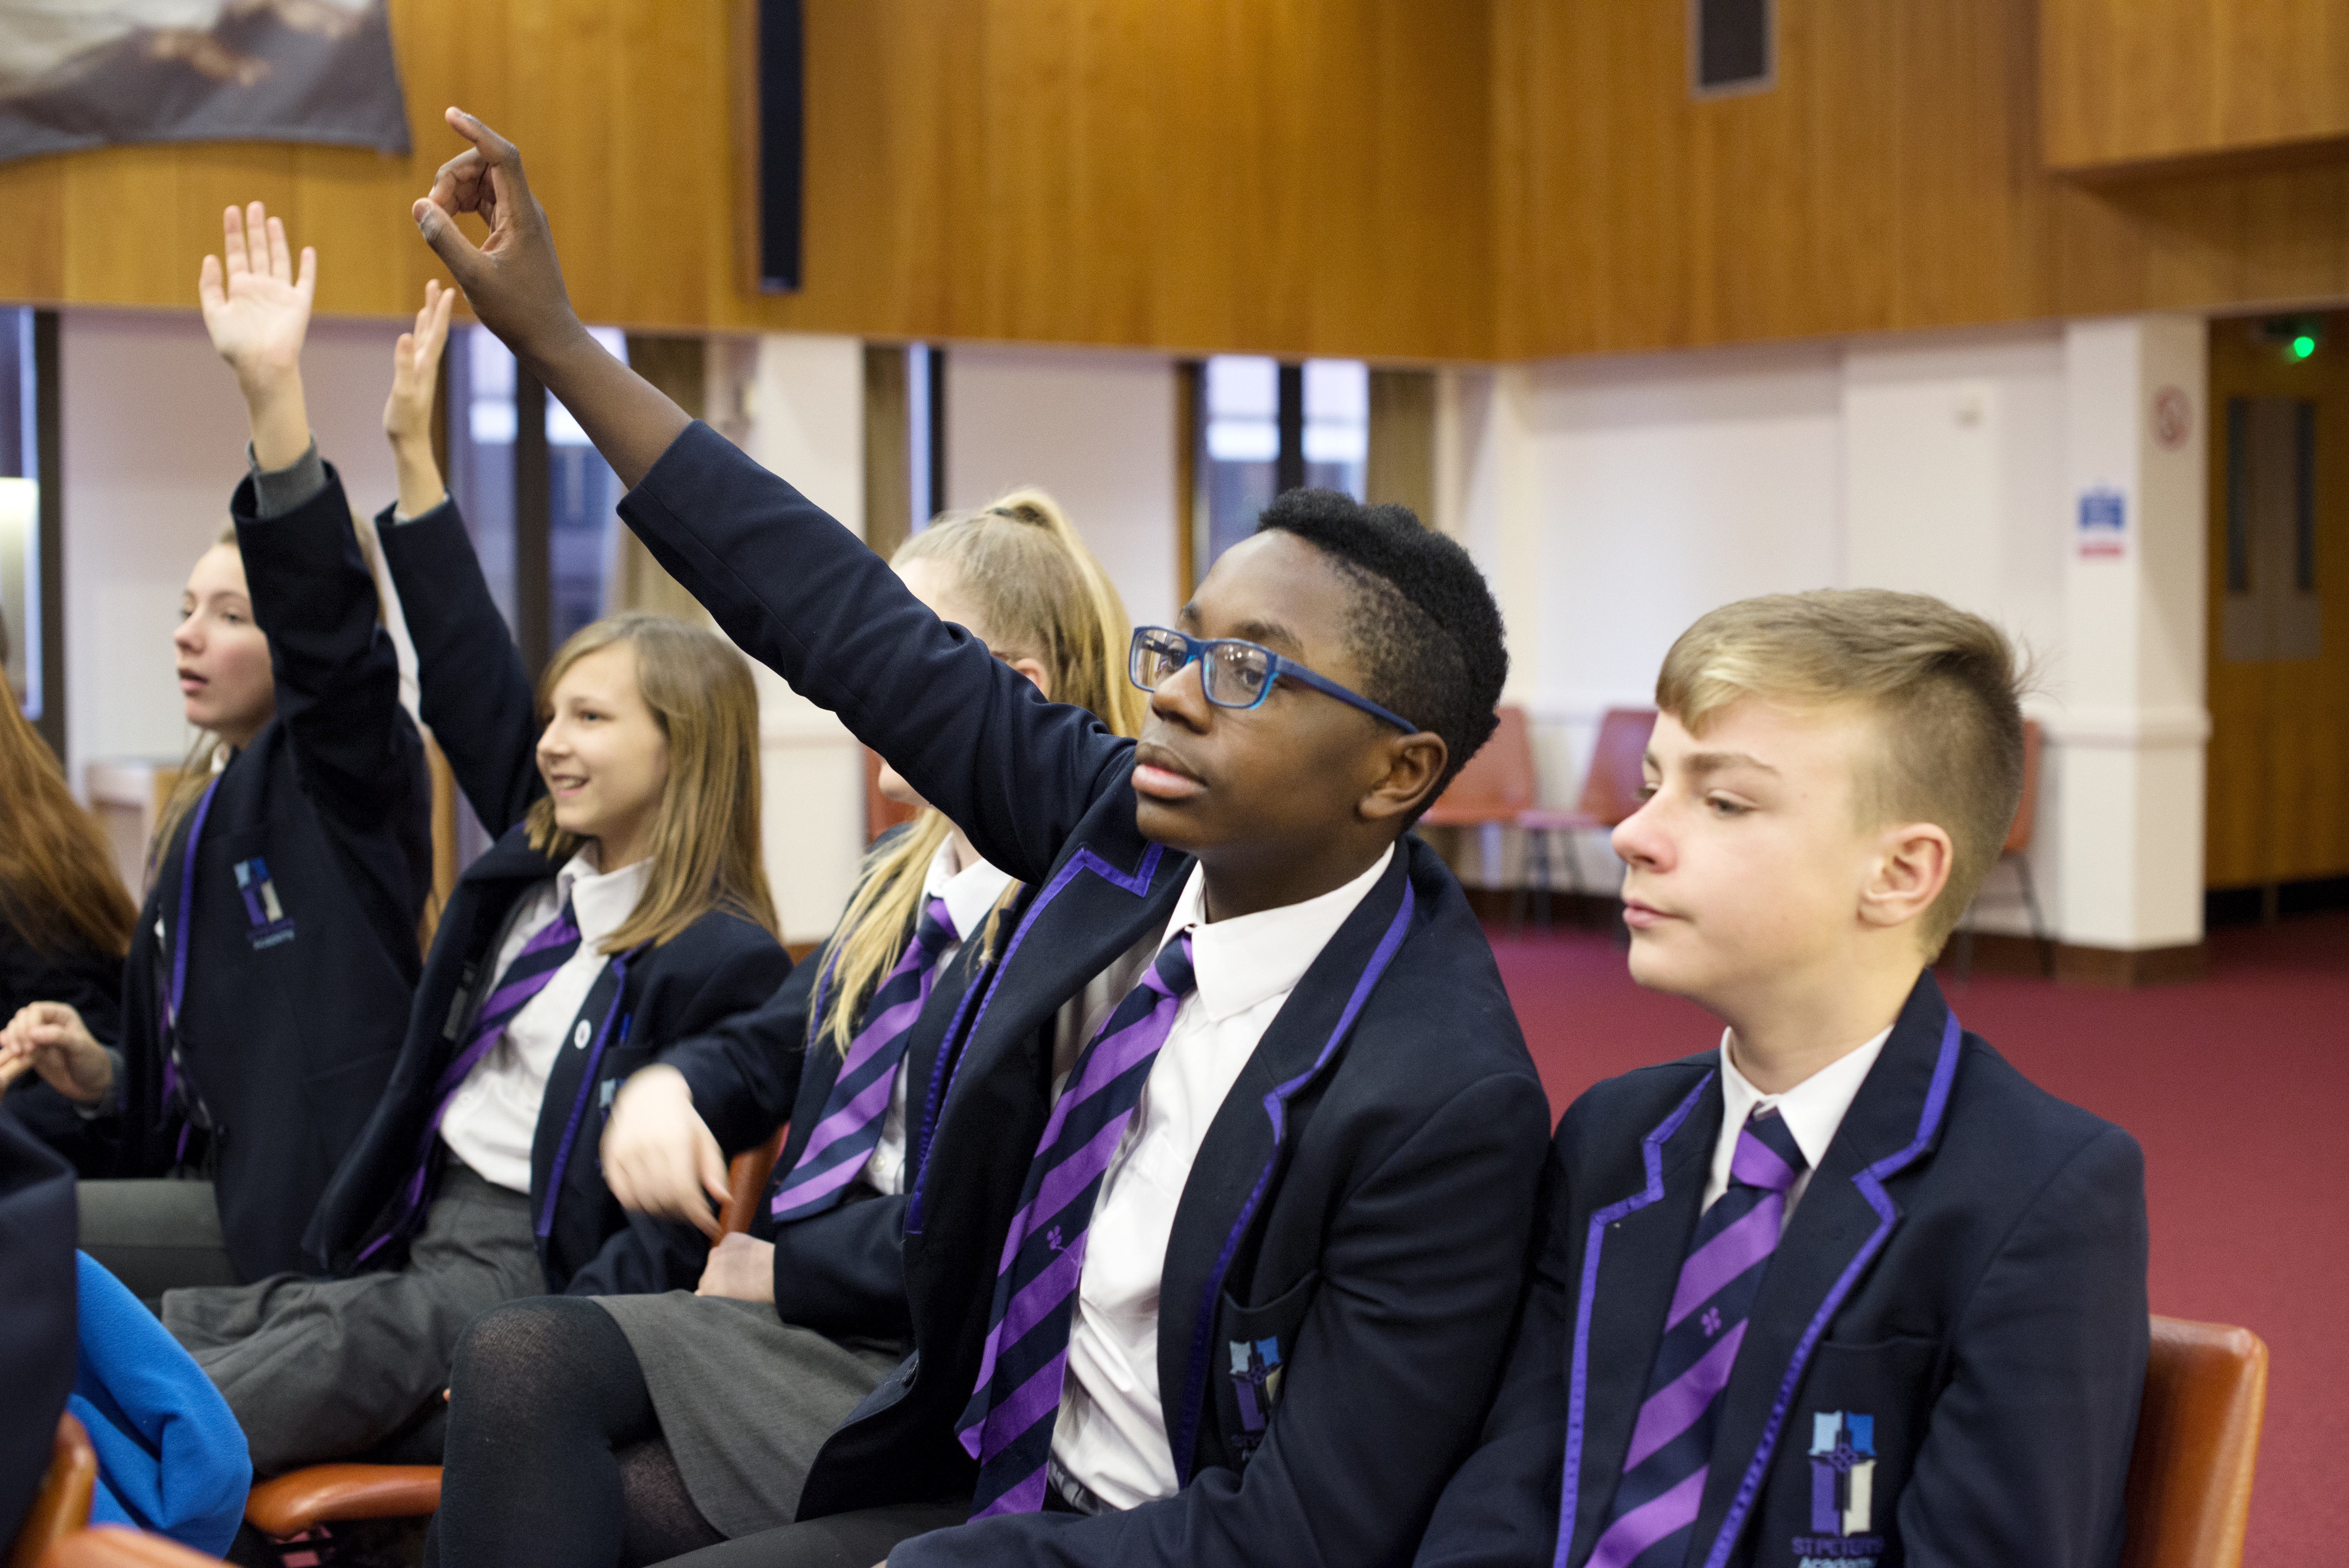 Key Stage 4 pupils raising their hands to answer questions